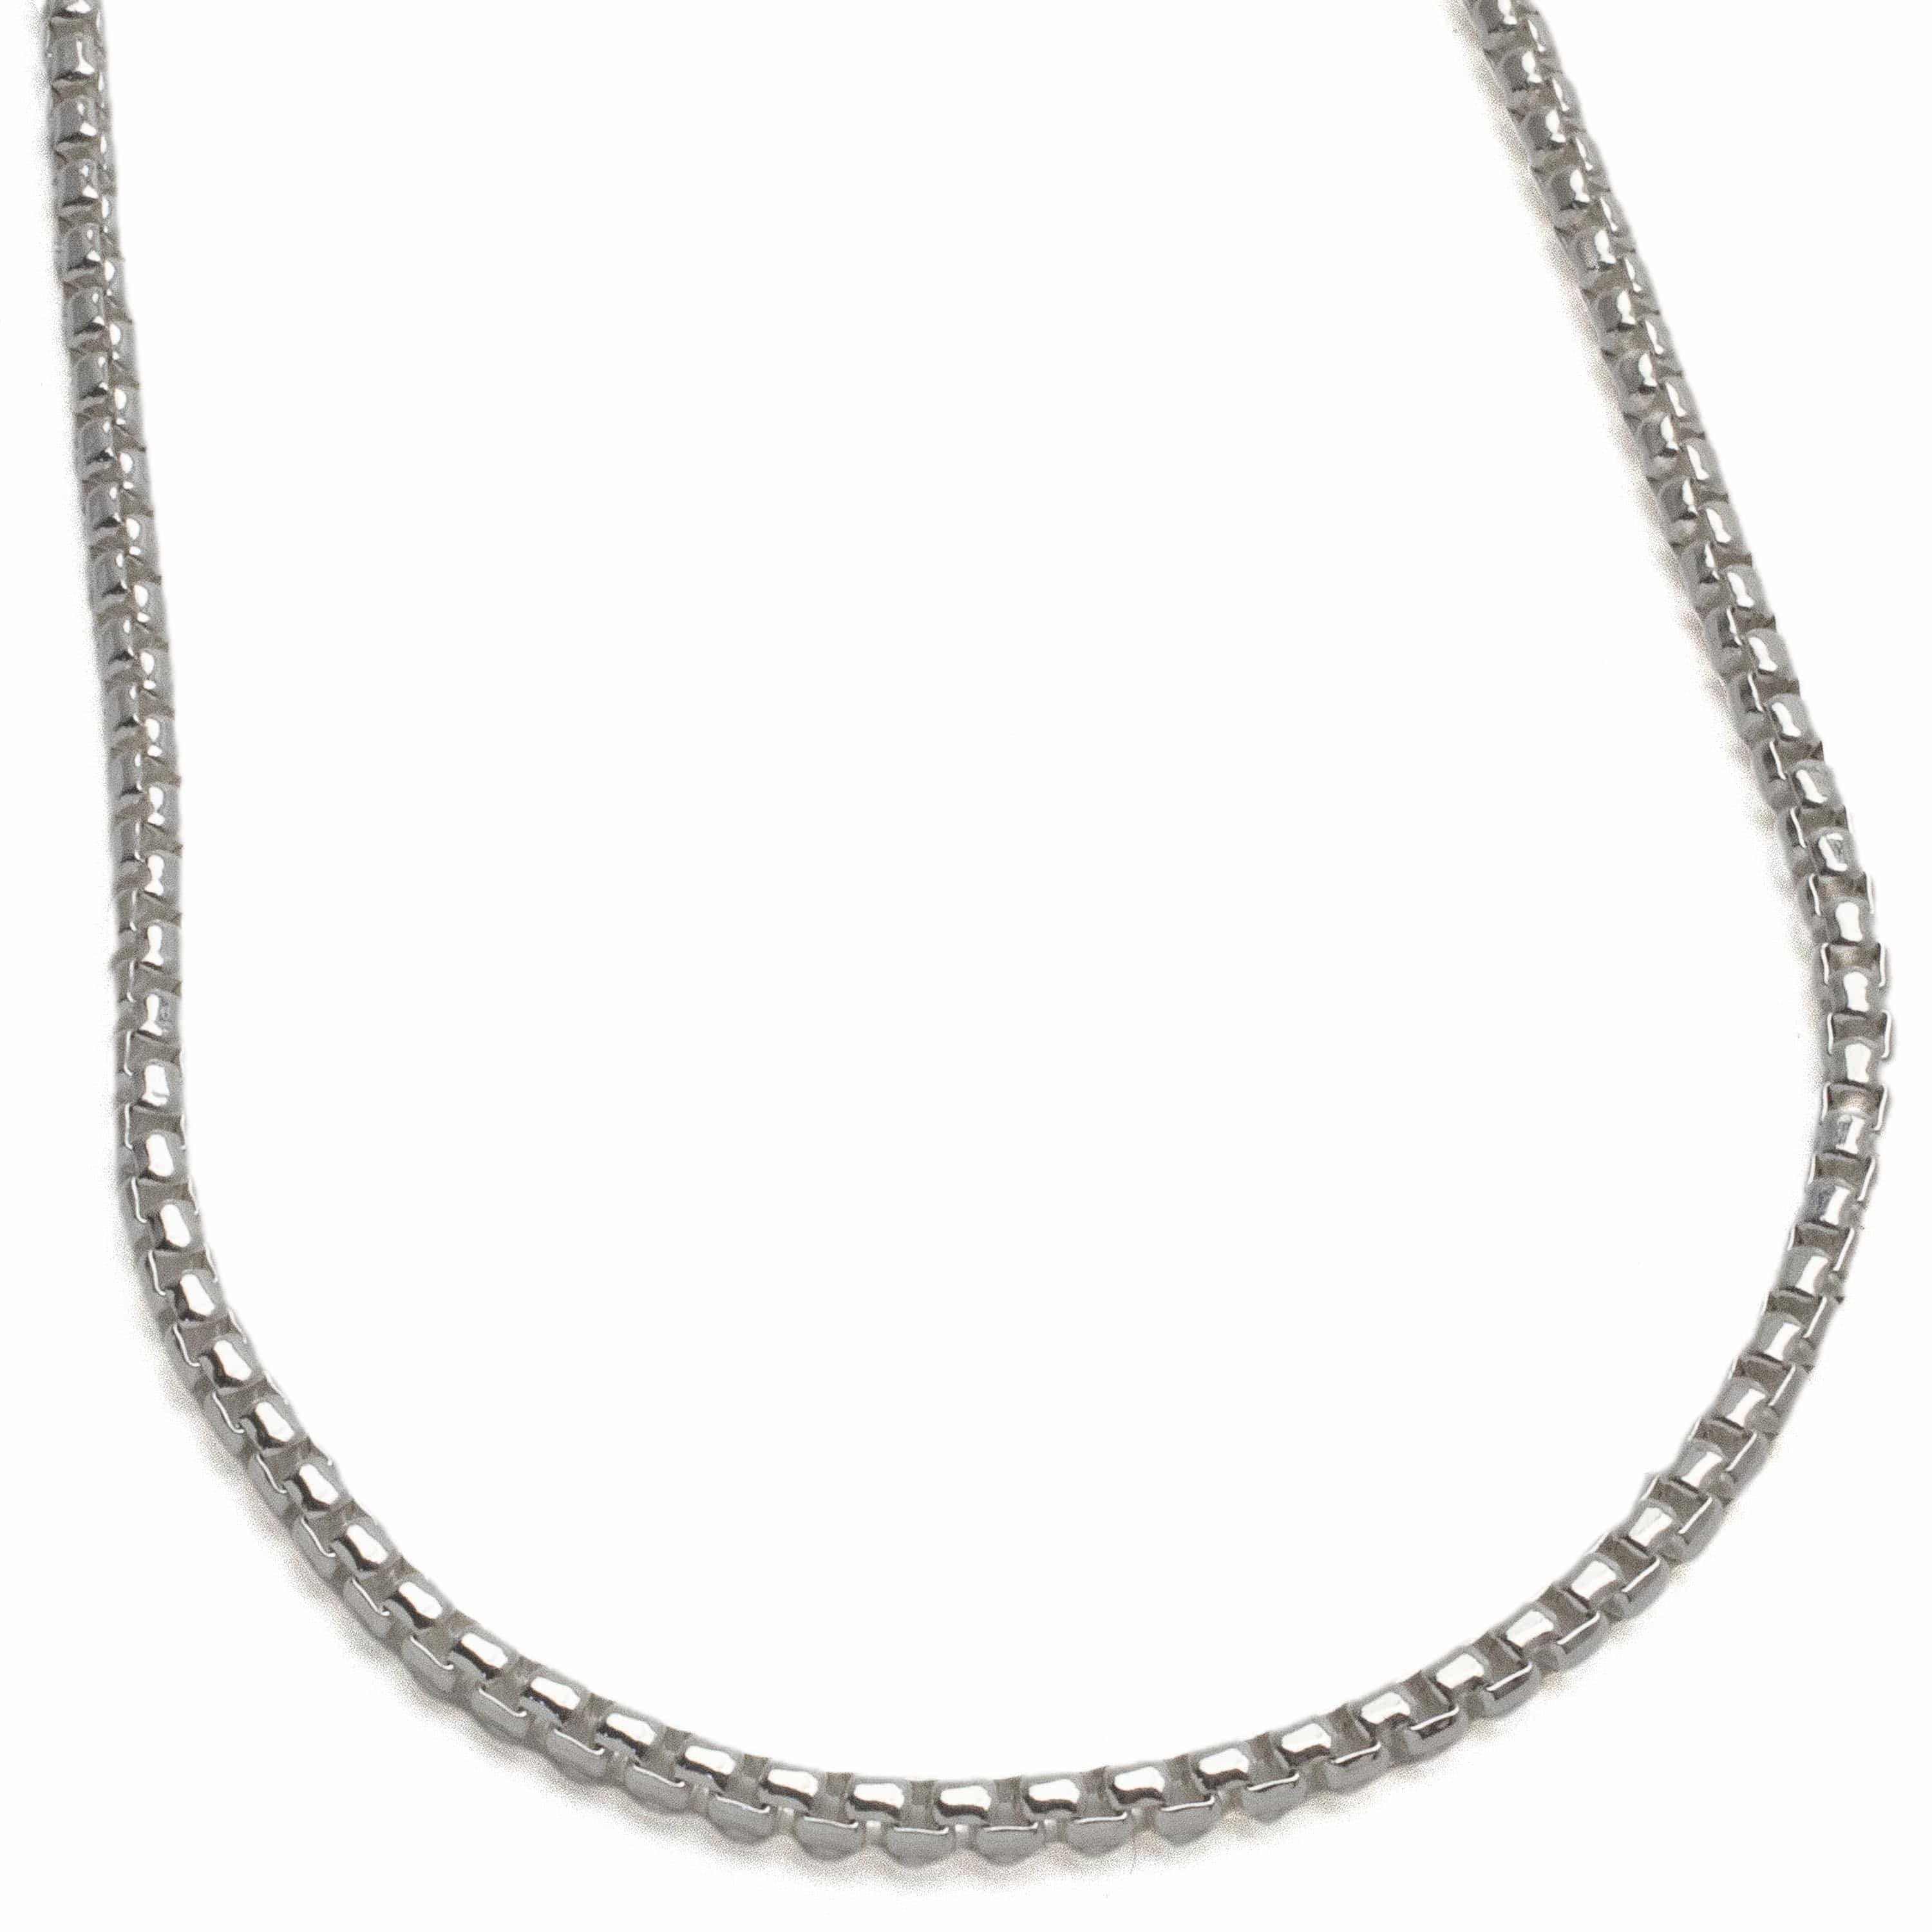 Kalifano Sterling Silver Chains 22" Italian Sterling Silver Box Chain Necklace 2.5mm SC-HRB050-22